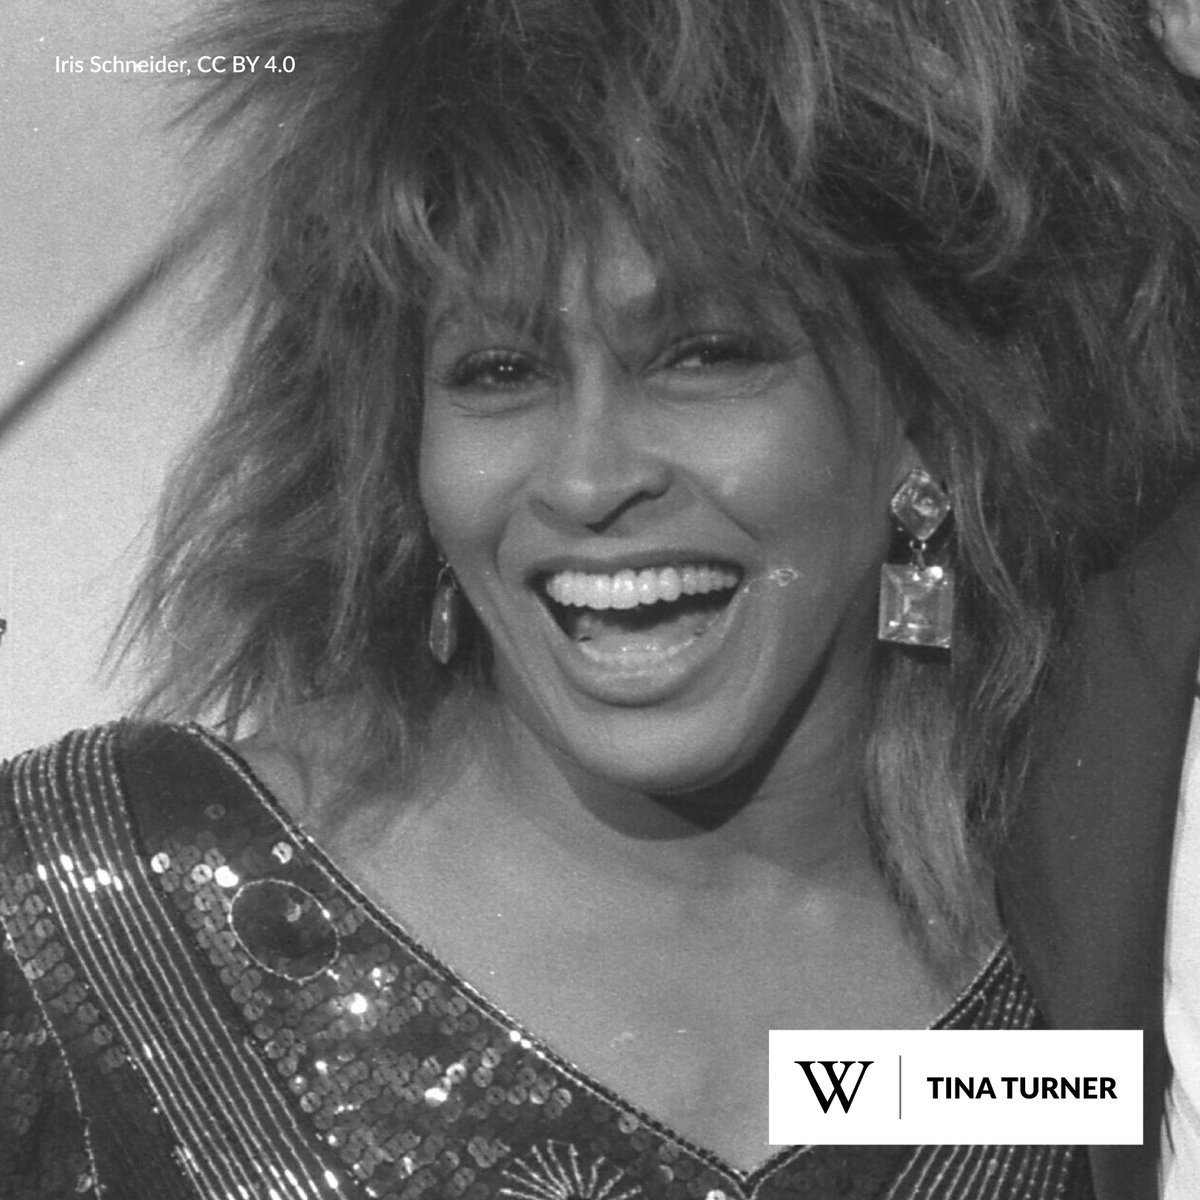 One year ago today, legendary singer Tina Turner died. She continues to be celebrated as the “Queen of Rock 'n' Roll” by fans across the globe. With a career spanning over five decades, Turner was one of the best-selling recording artists of all time. She released numerous hit